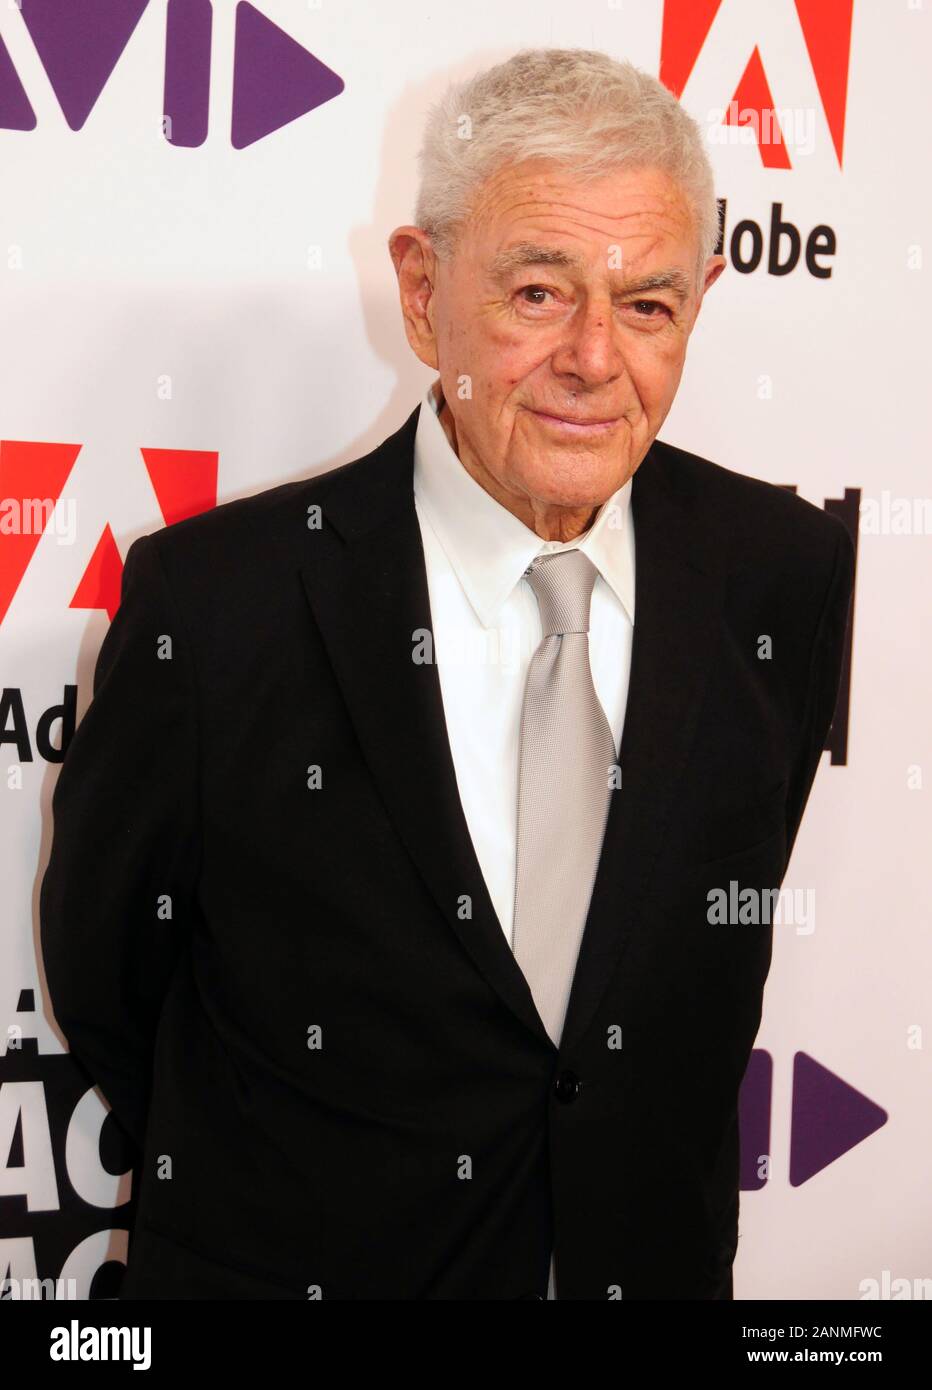 Beverly Hills, California, USA 17th January 2020 Director Richard Donner attends the 70th Annual ACE Eddie Awards on January 17, 2020 at the Beverly Hilton Hotel in Beverly Hills, California, USA. Photo by Barry King/Alamy Live News Stock Photo